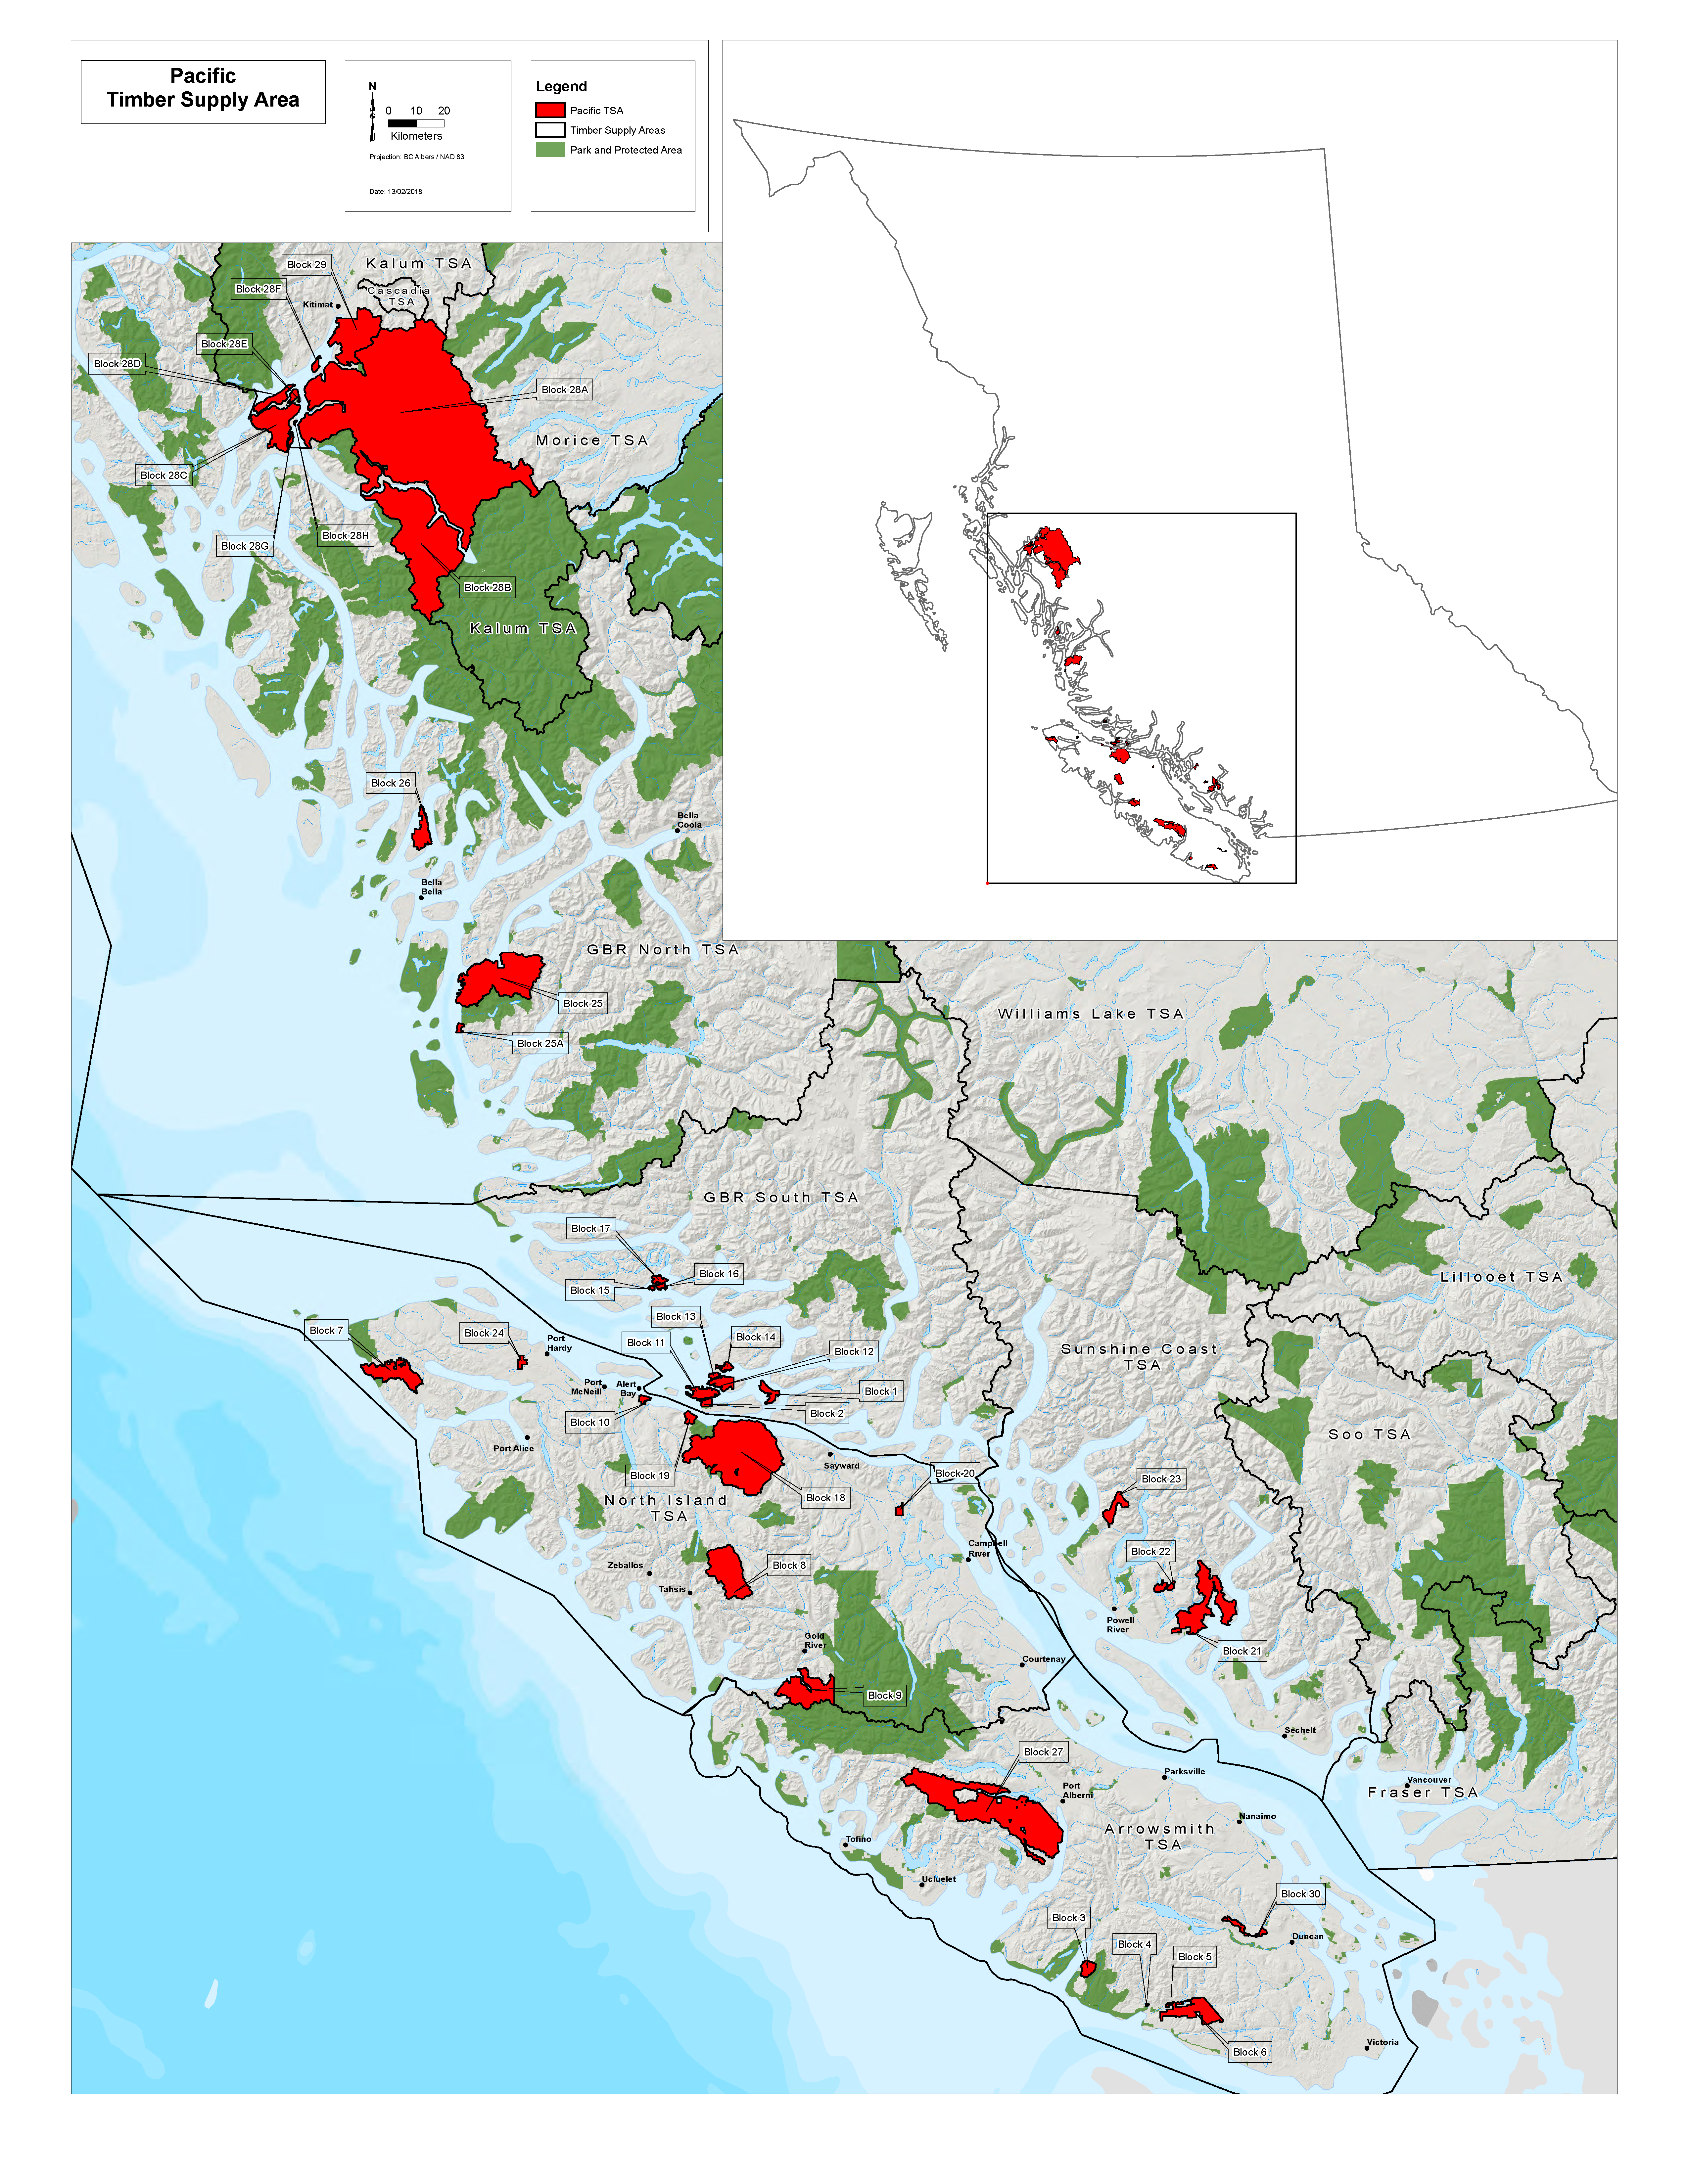 map of pacific Timber Supply Area, click to expand